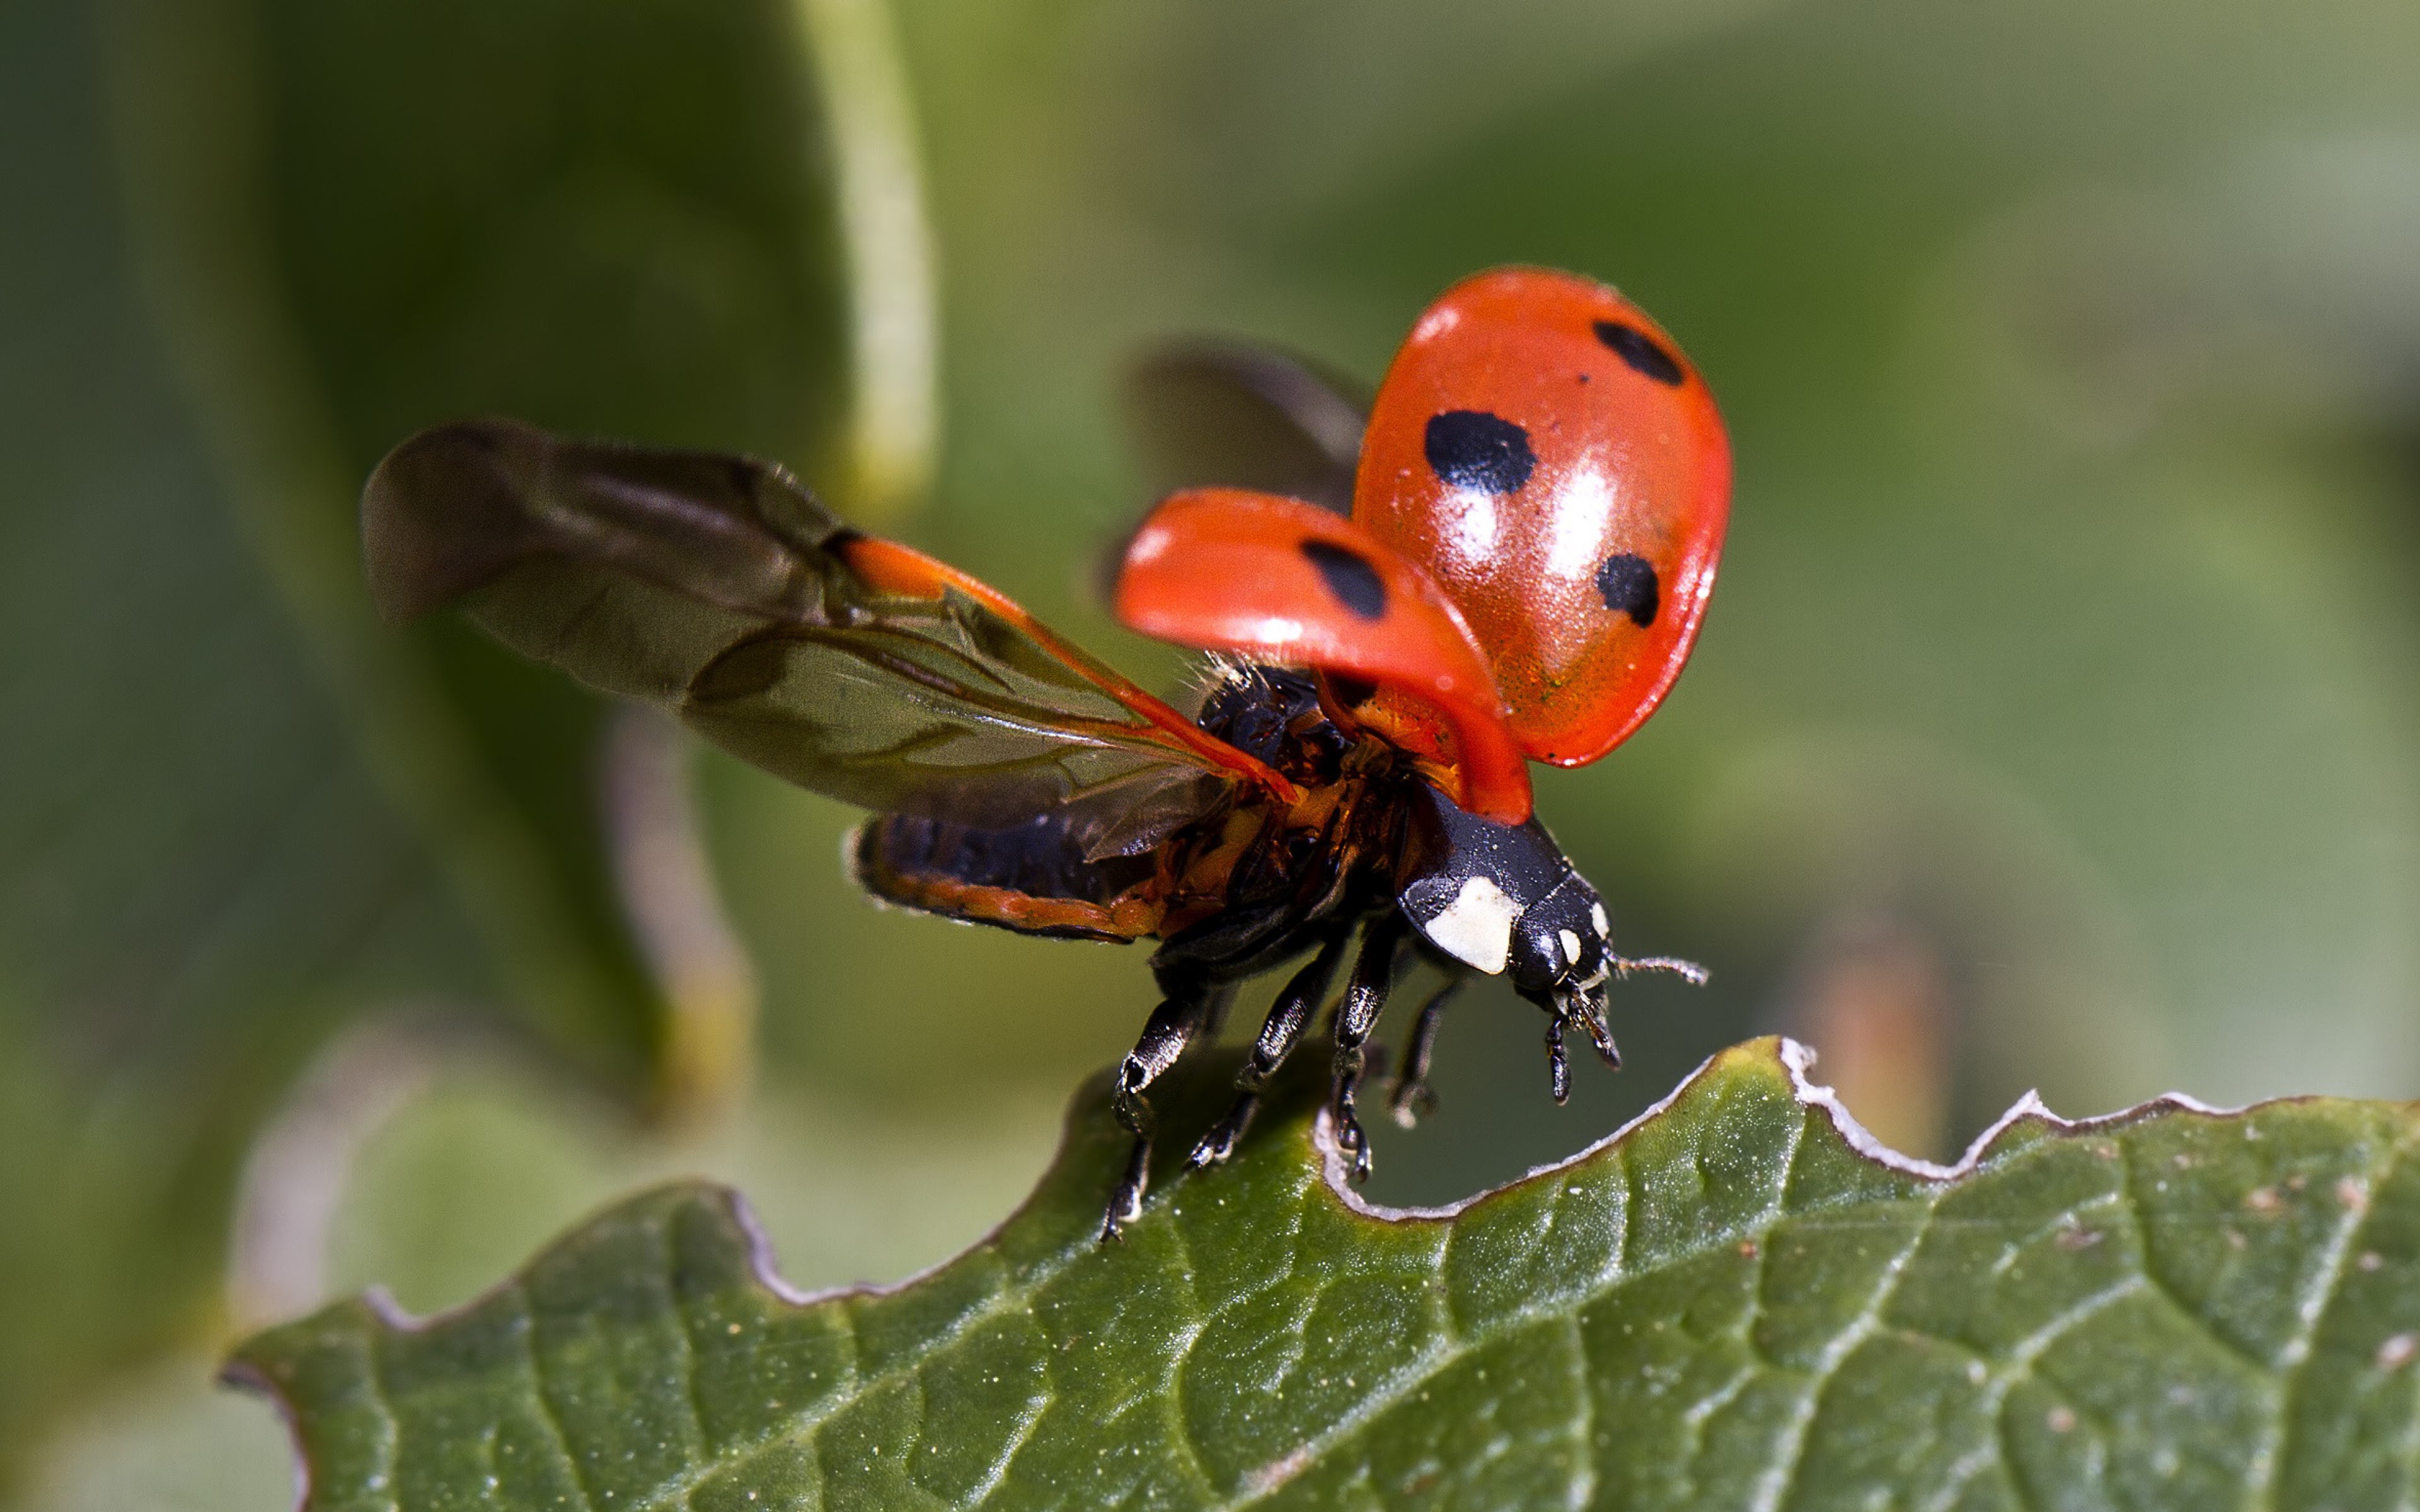 ladybug-insect-open-wings-leaves-wallpapersbyte-com-3840x2400